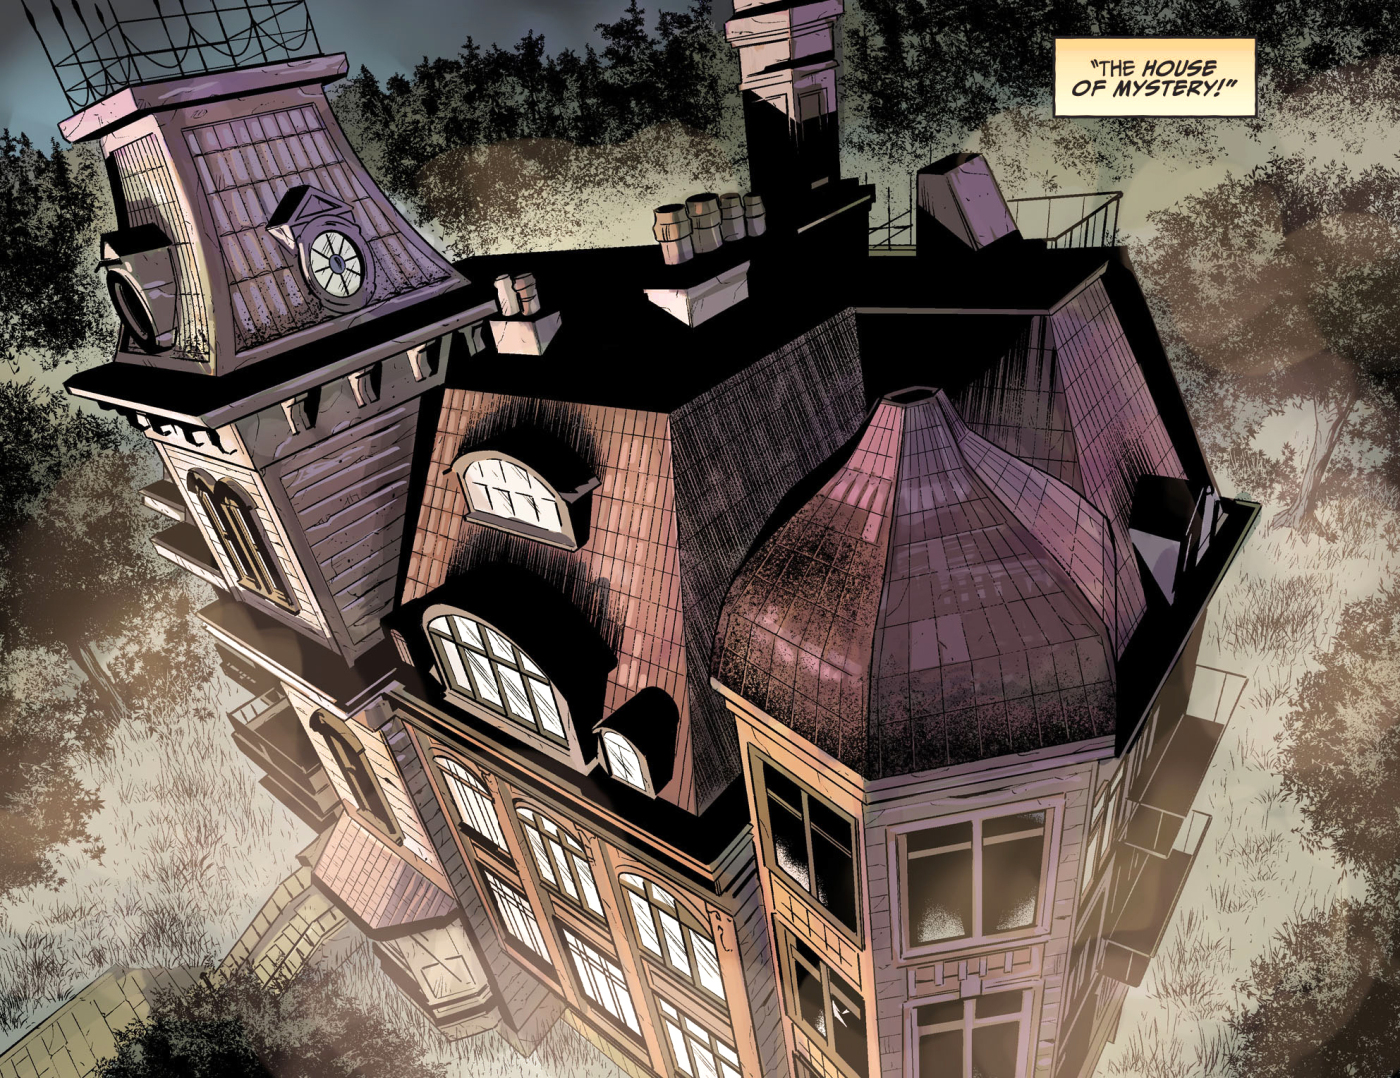 House Of Mystery #7